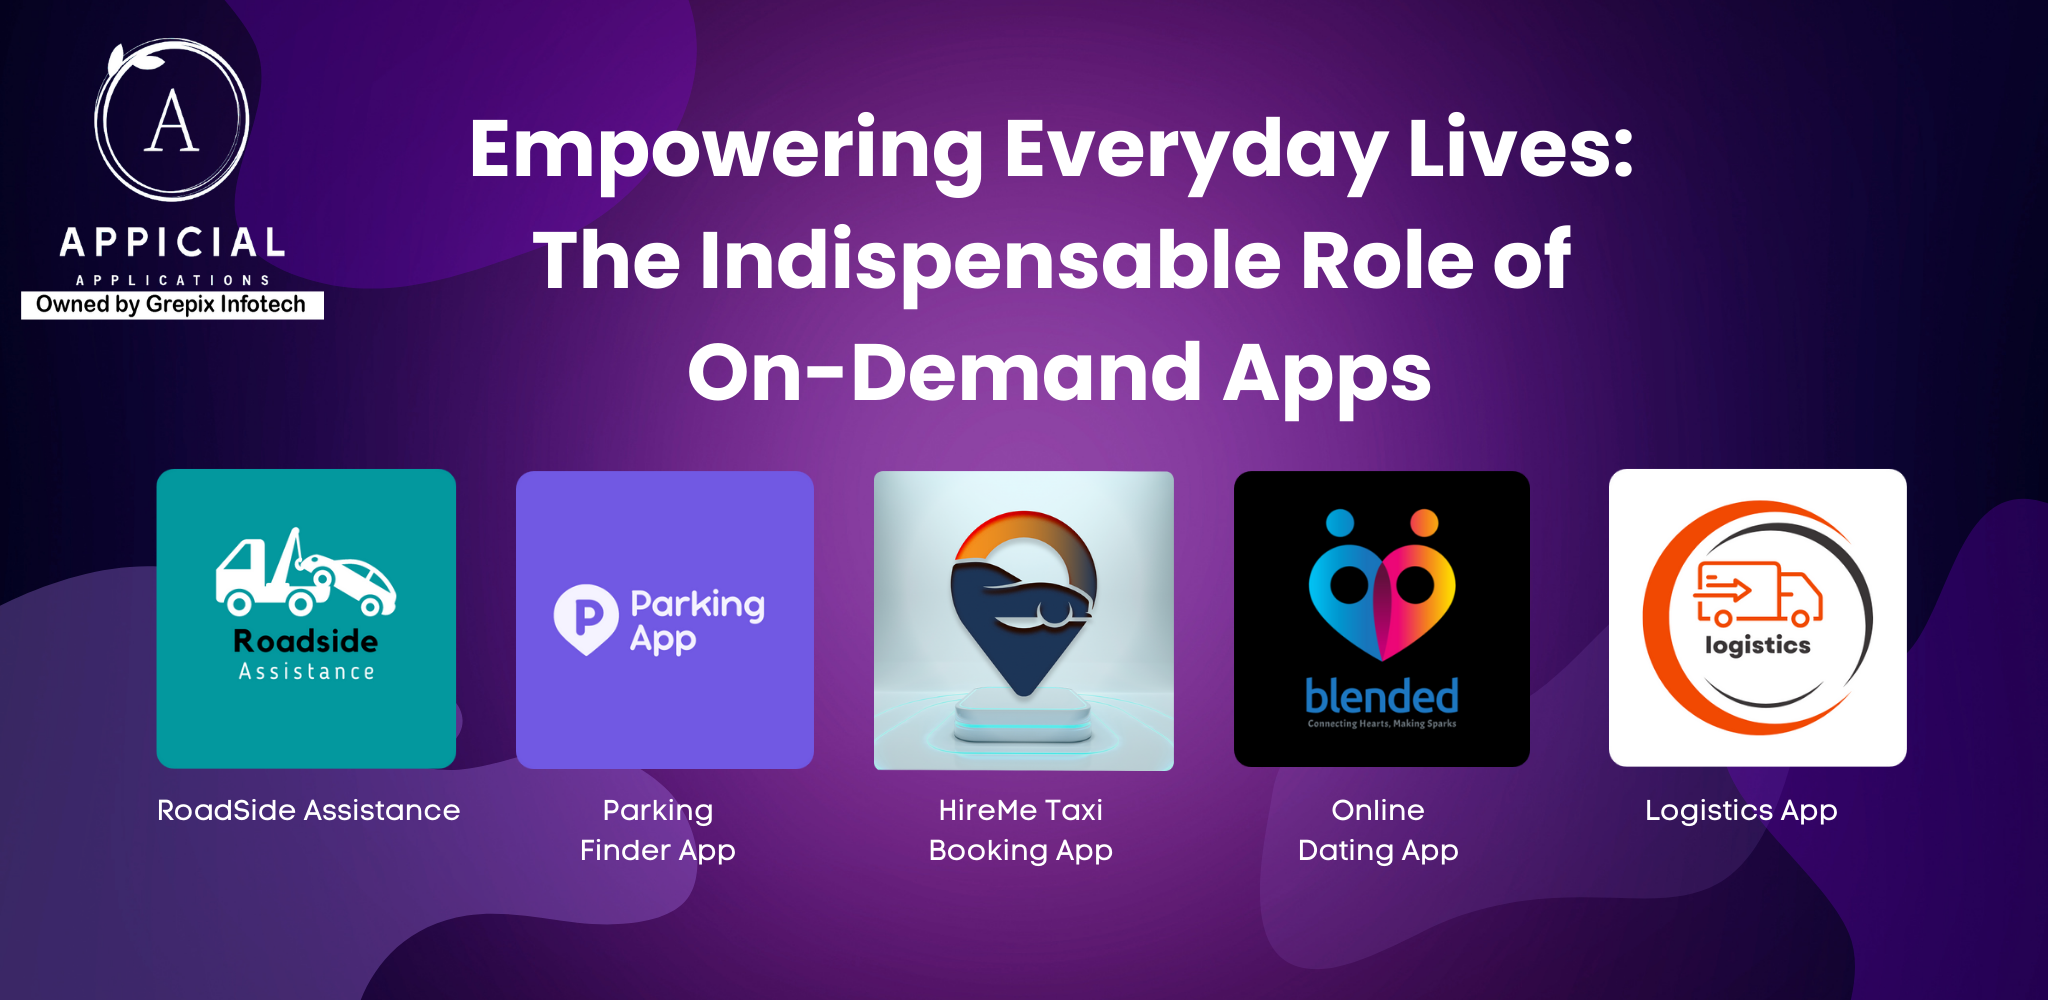 Empowering Everyday Lives: The Indispensable Role of On-Demand Apps